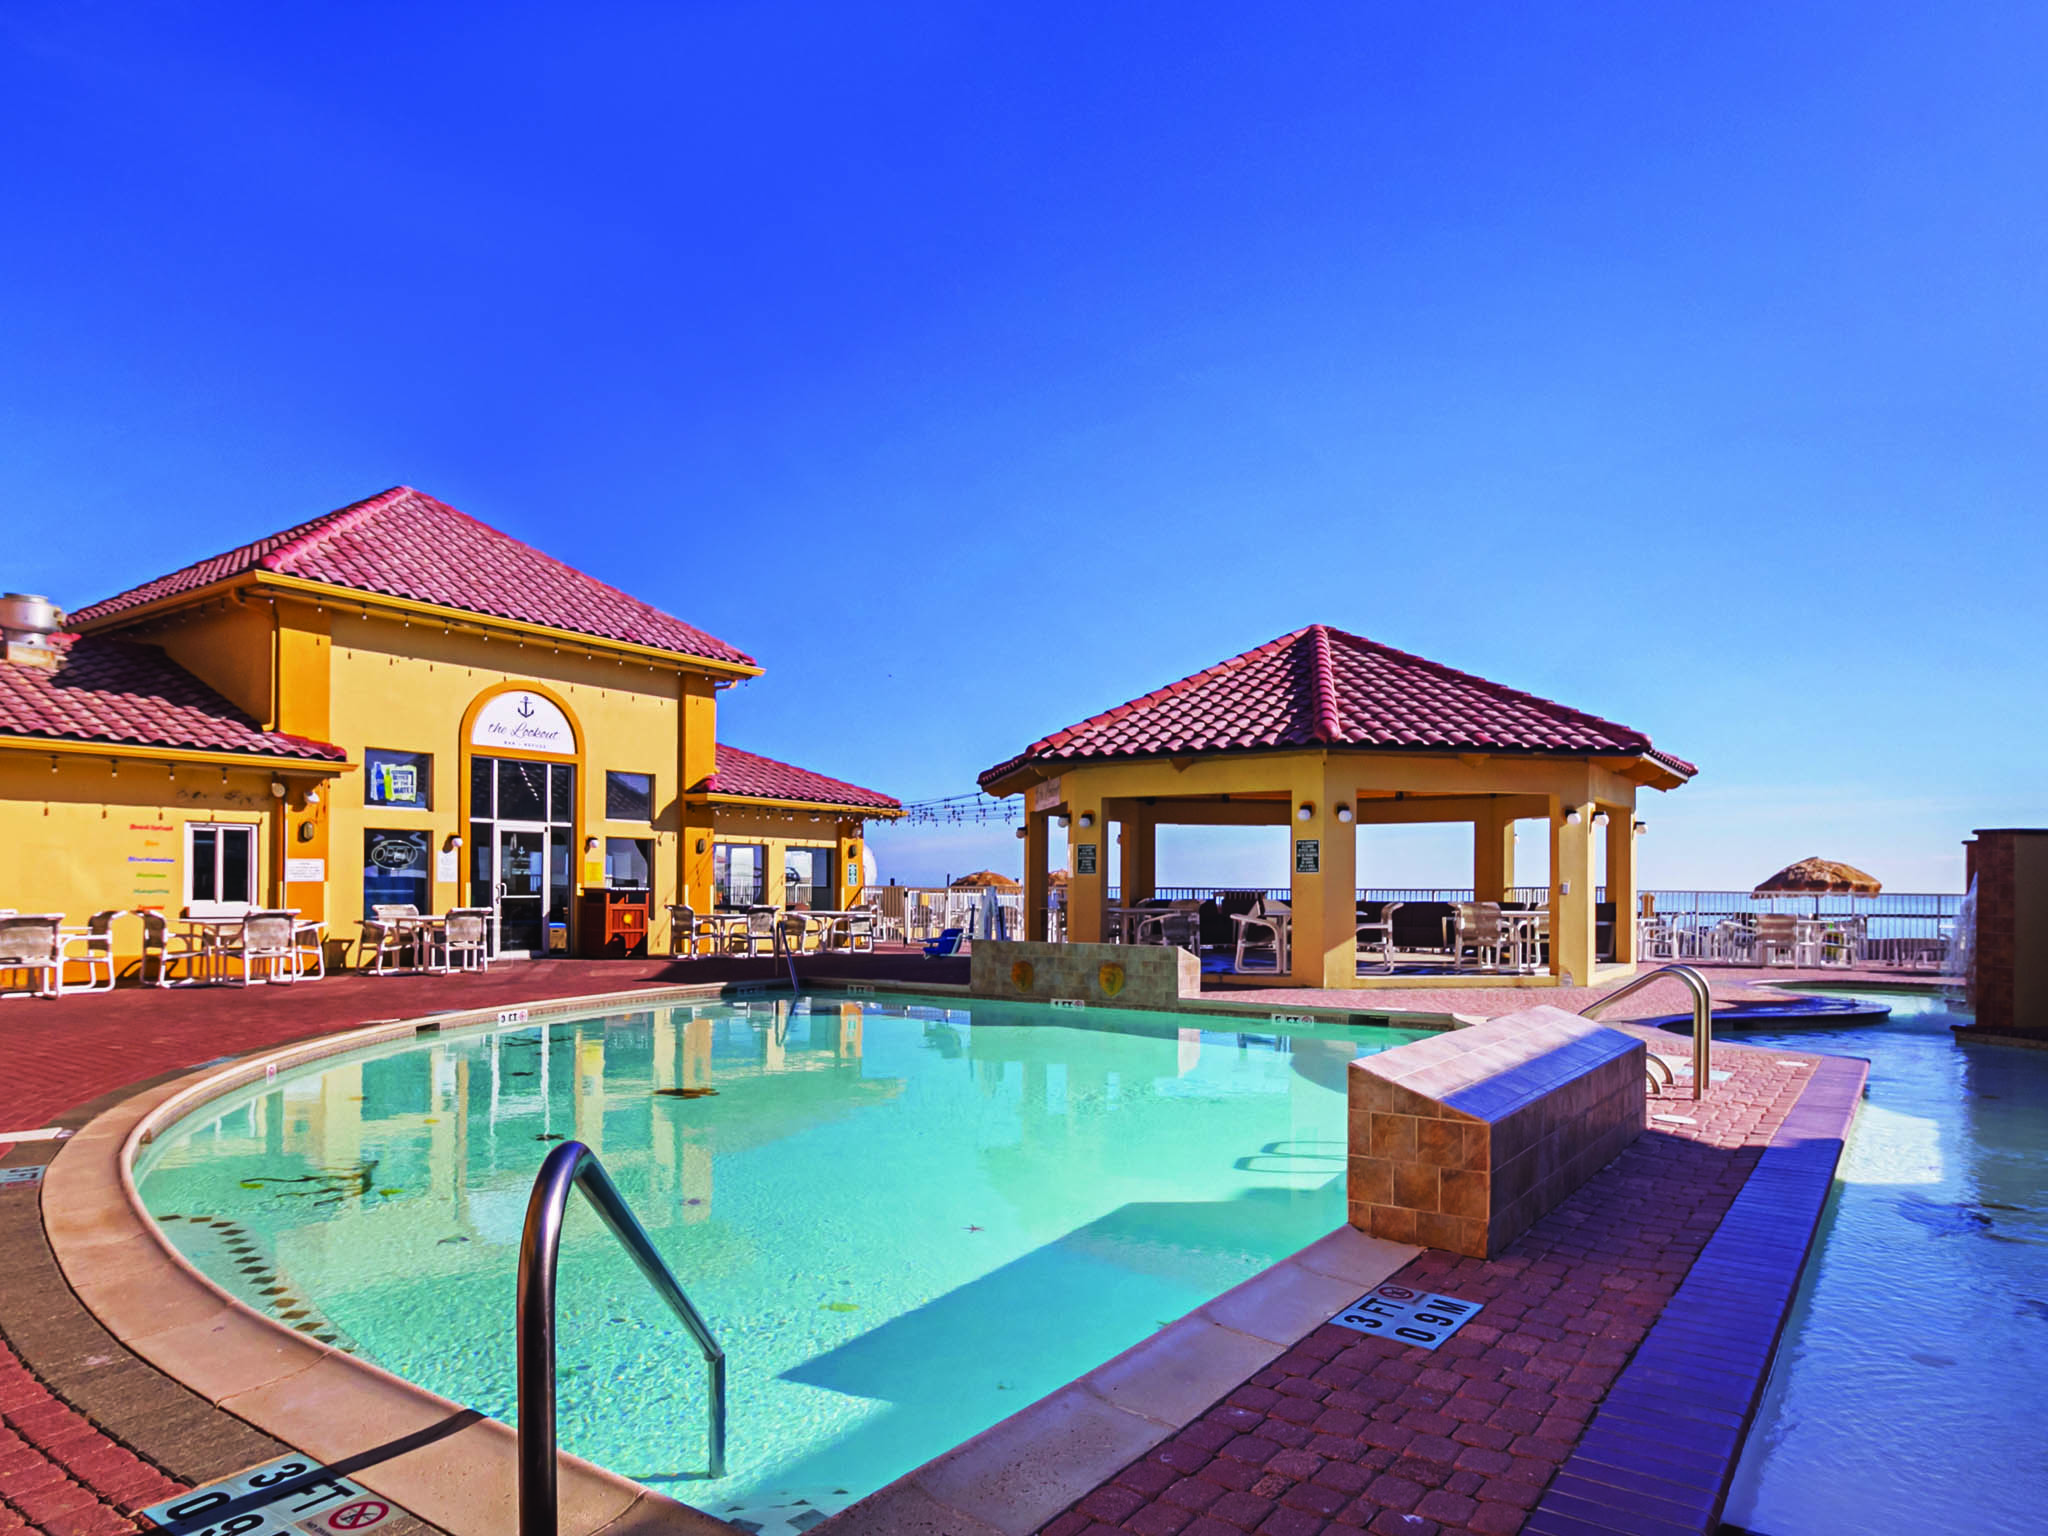 La Quinta Inn & Suites Beach Hotel South Padre Island - Enjoy South Padre  Island - Beach Vacations, Hotels and More